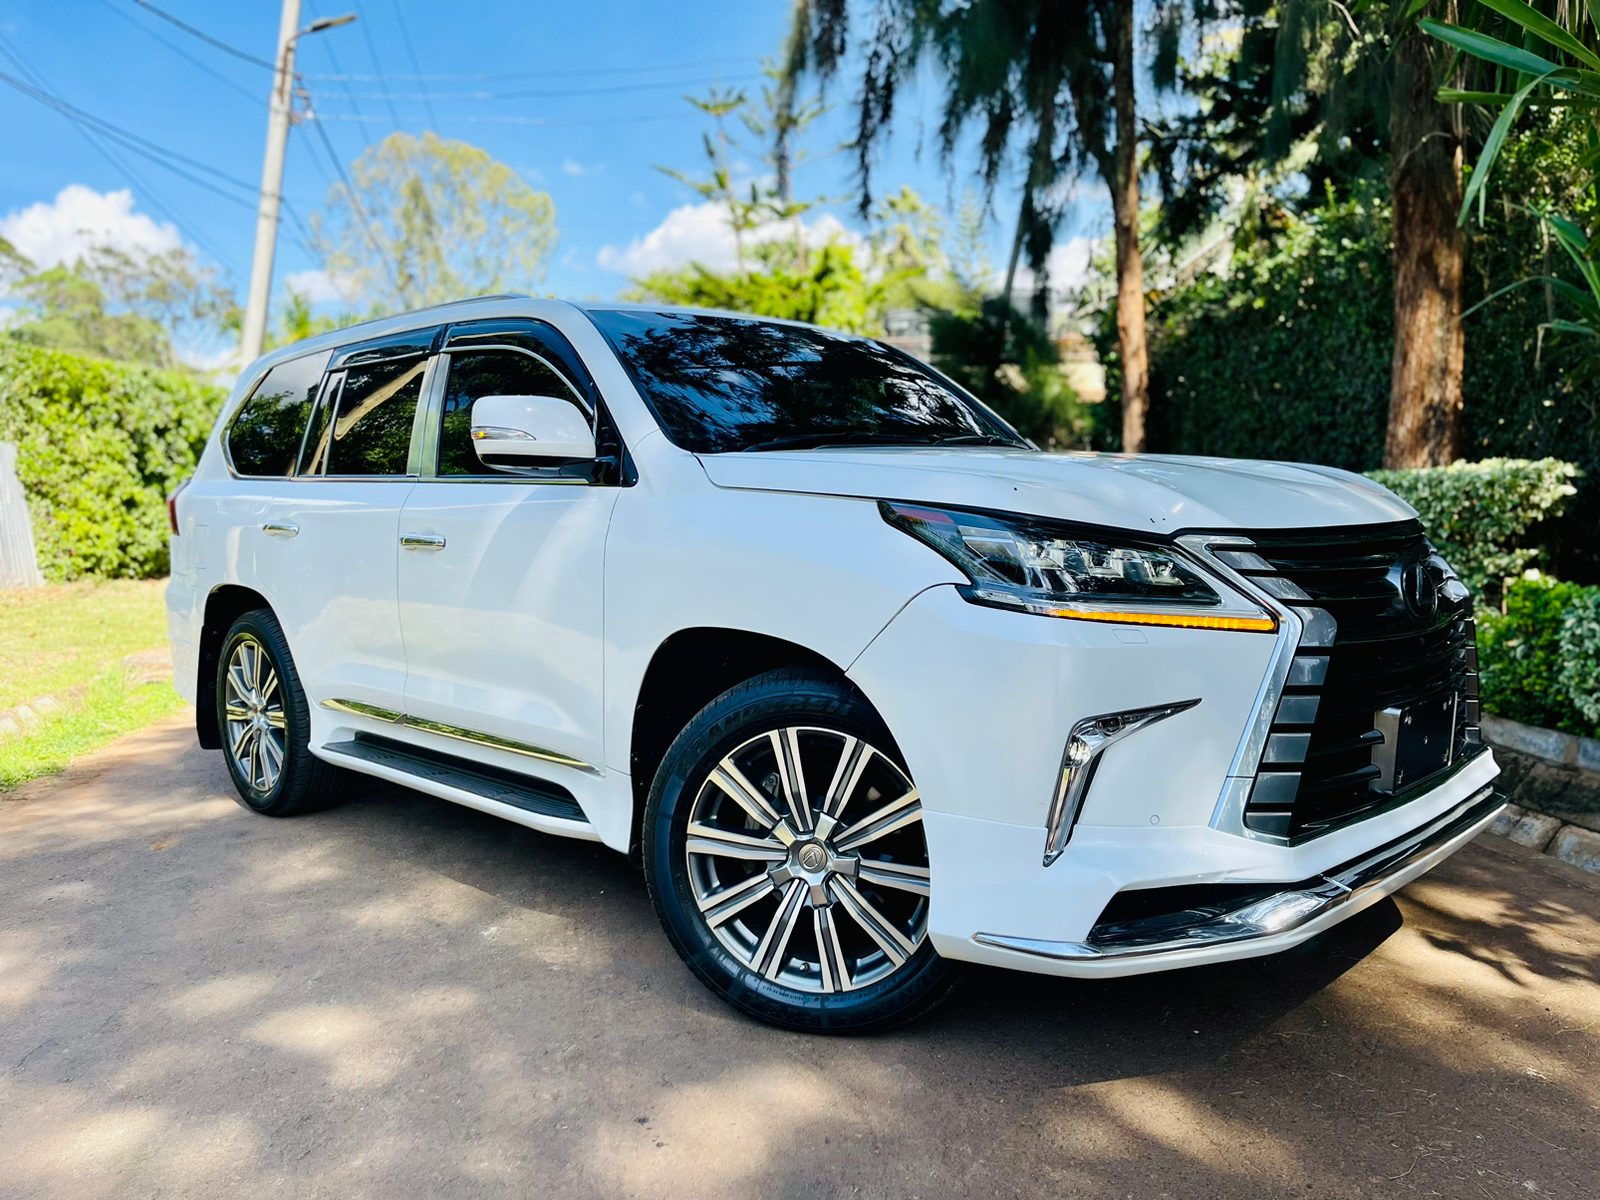 LEXUS LX 570 2016 Fully Loaded Exclusive CHEAPEST